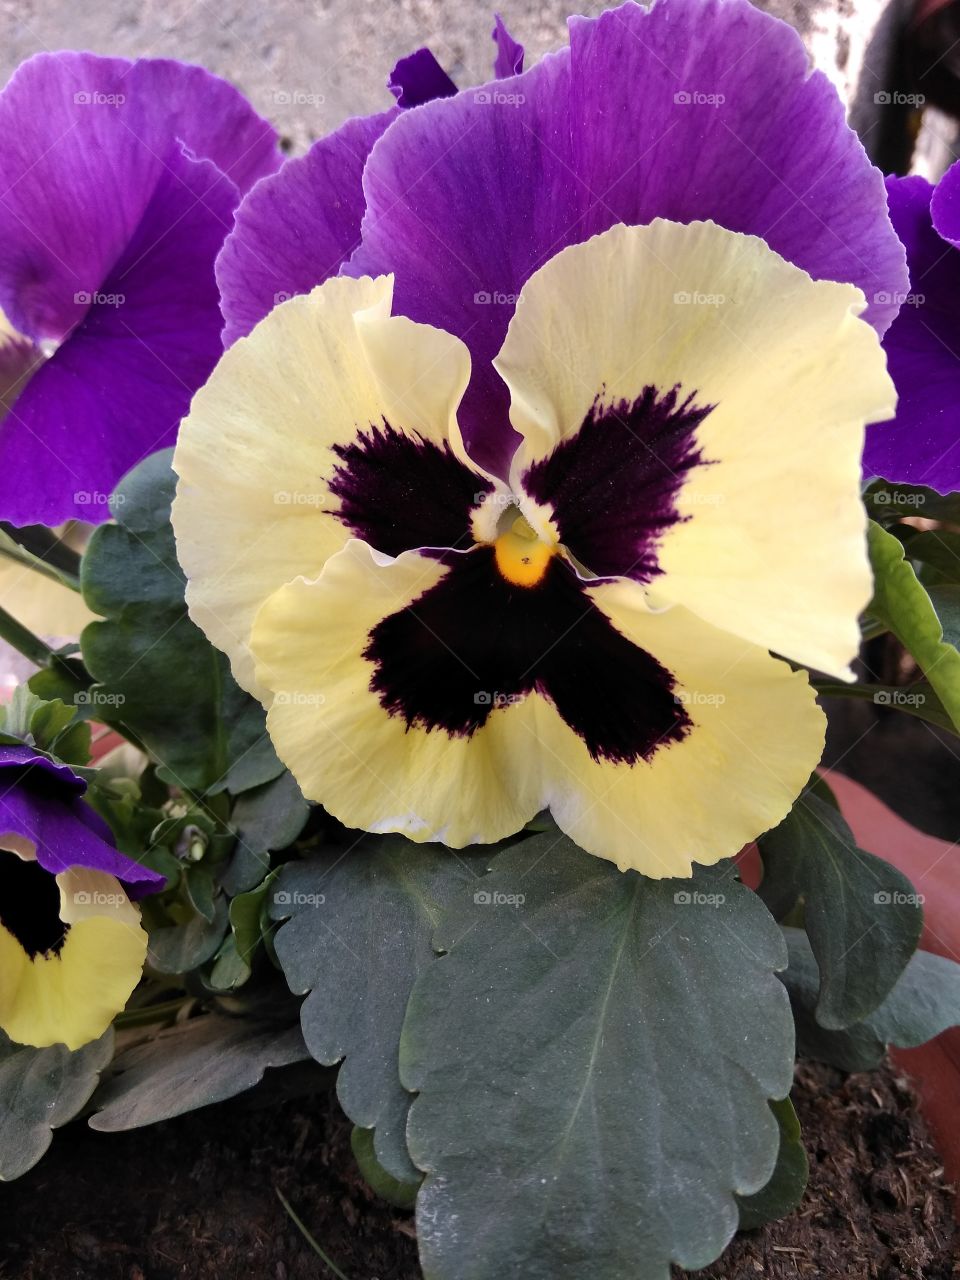 Flower in  yellow and violet colour...
#Rajtagged